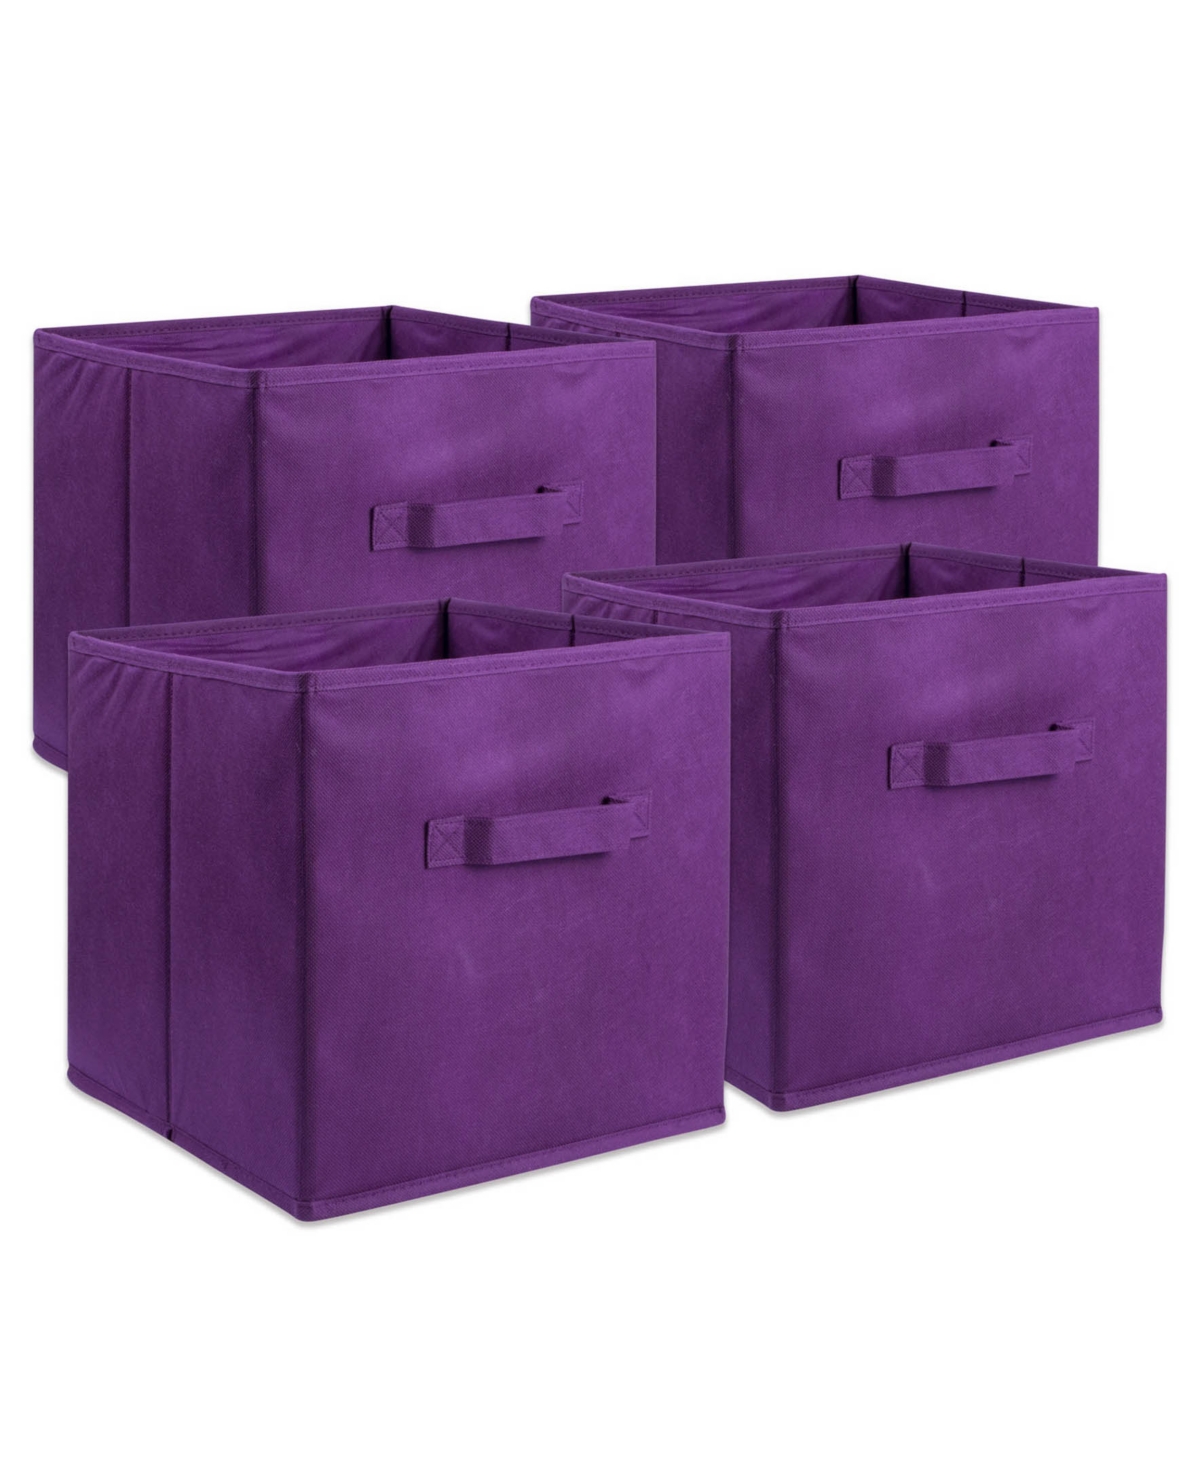 Non-woven Polypropylene Cube Solid Square Set of 4 - Purple